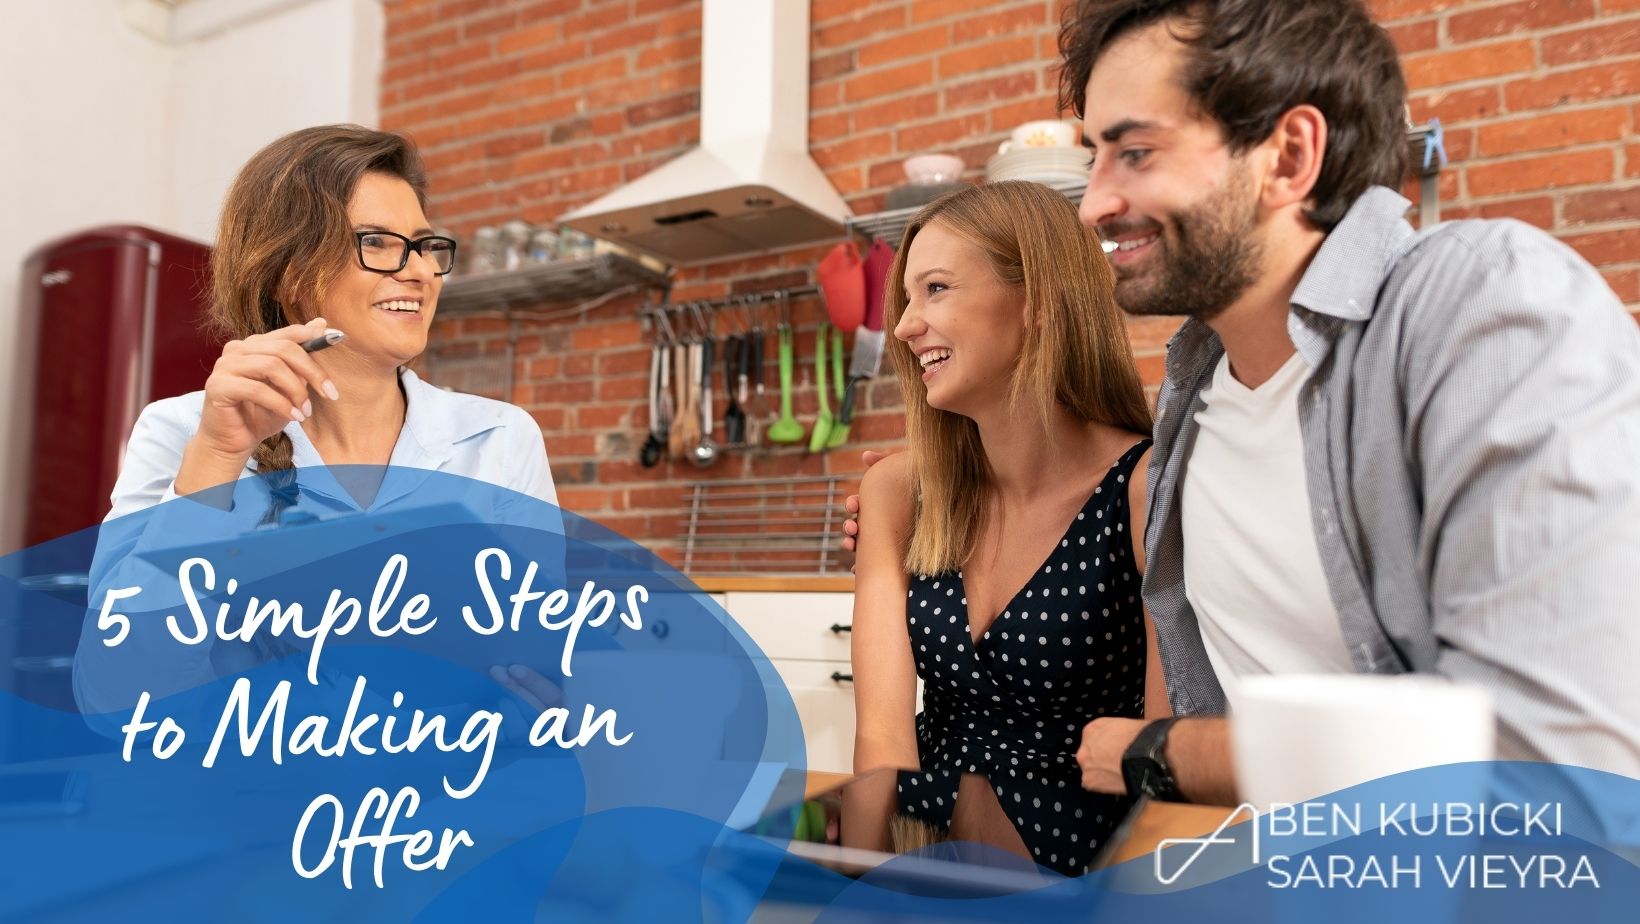 5 Simple Steps to Making an Offer